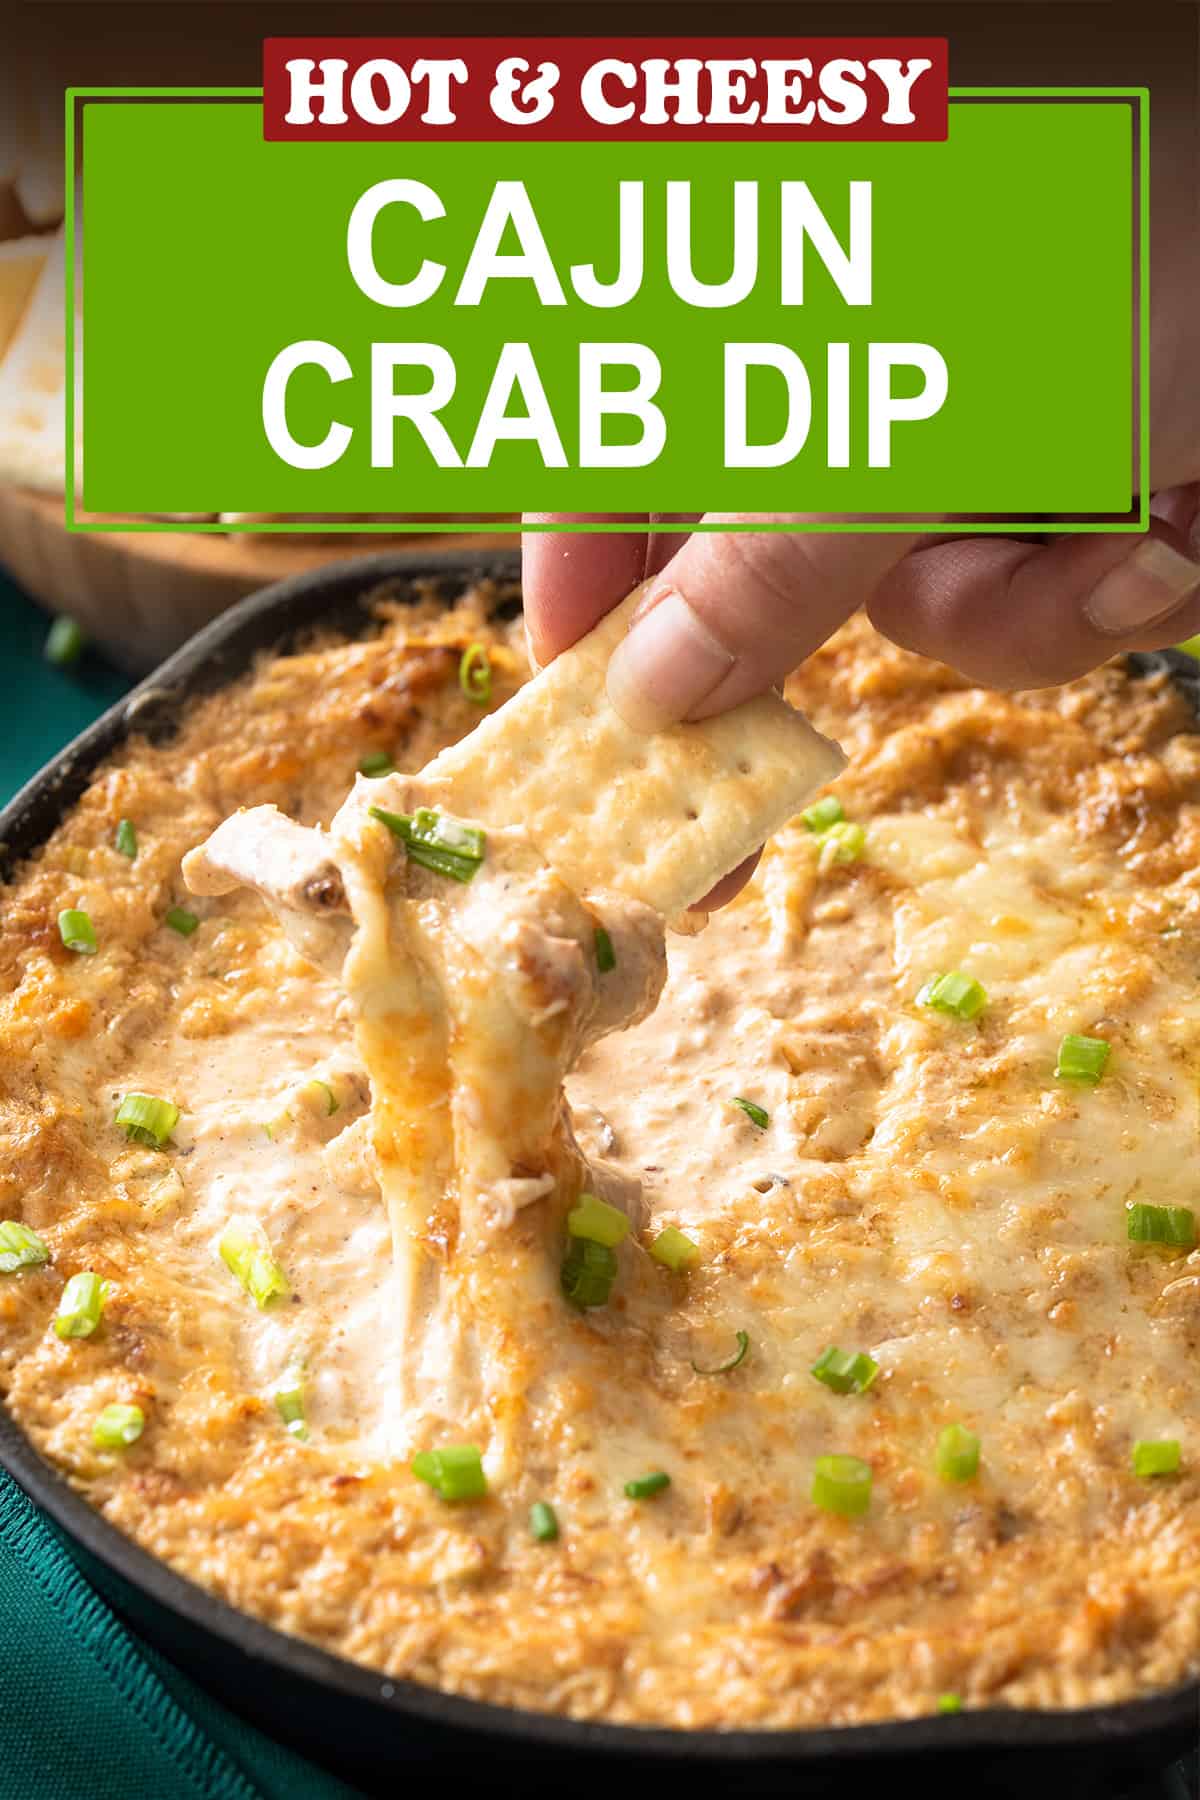 Cracker dipping into Cajun crab dip in a cast iron skillet with post title label.